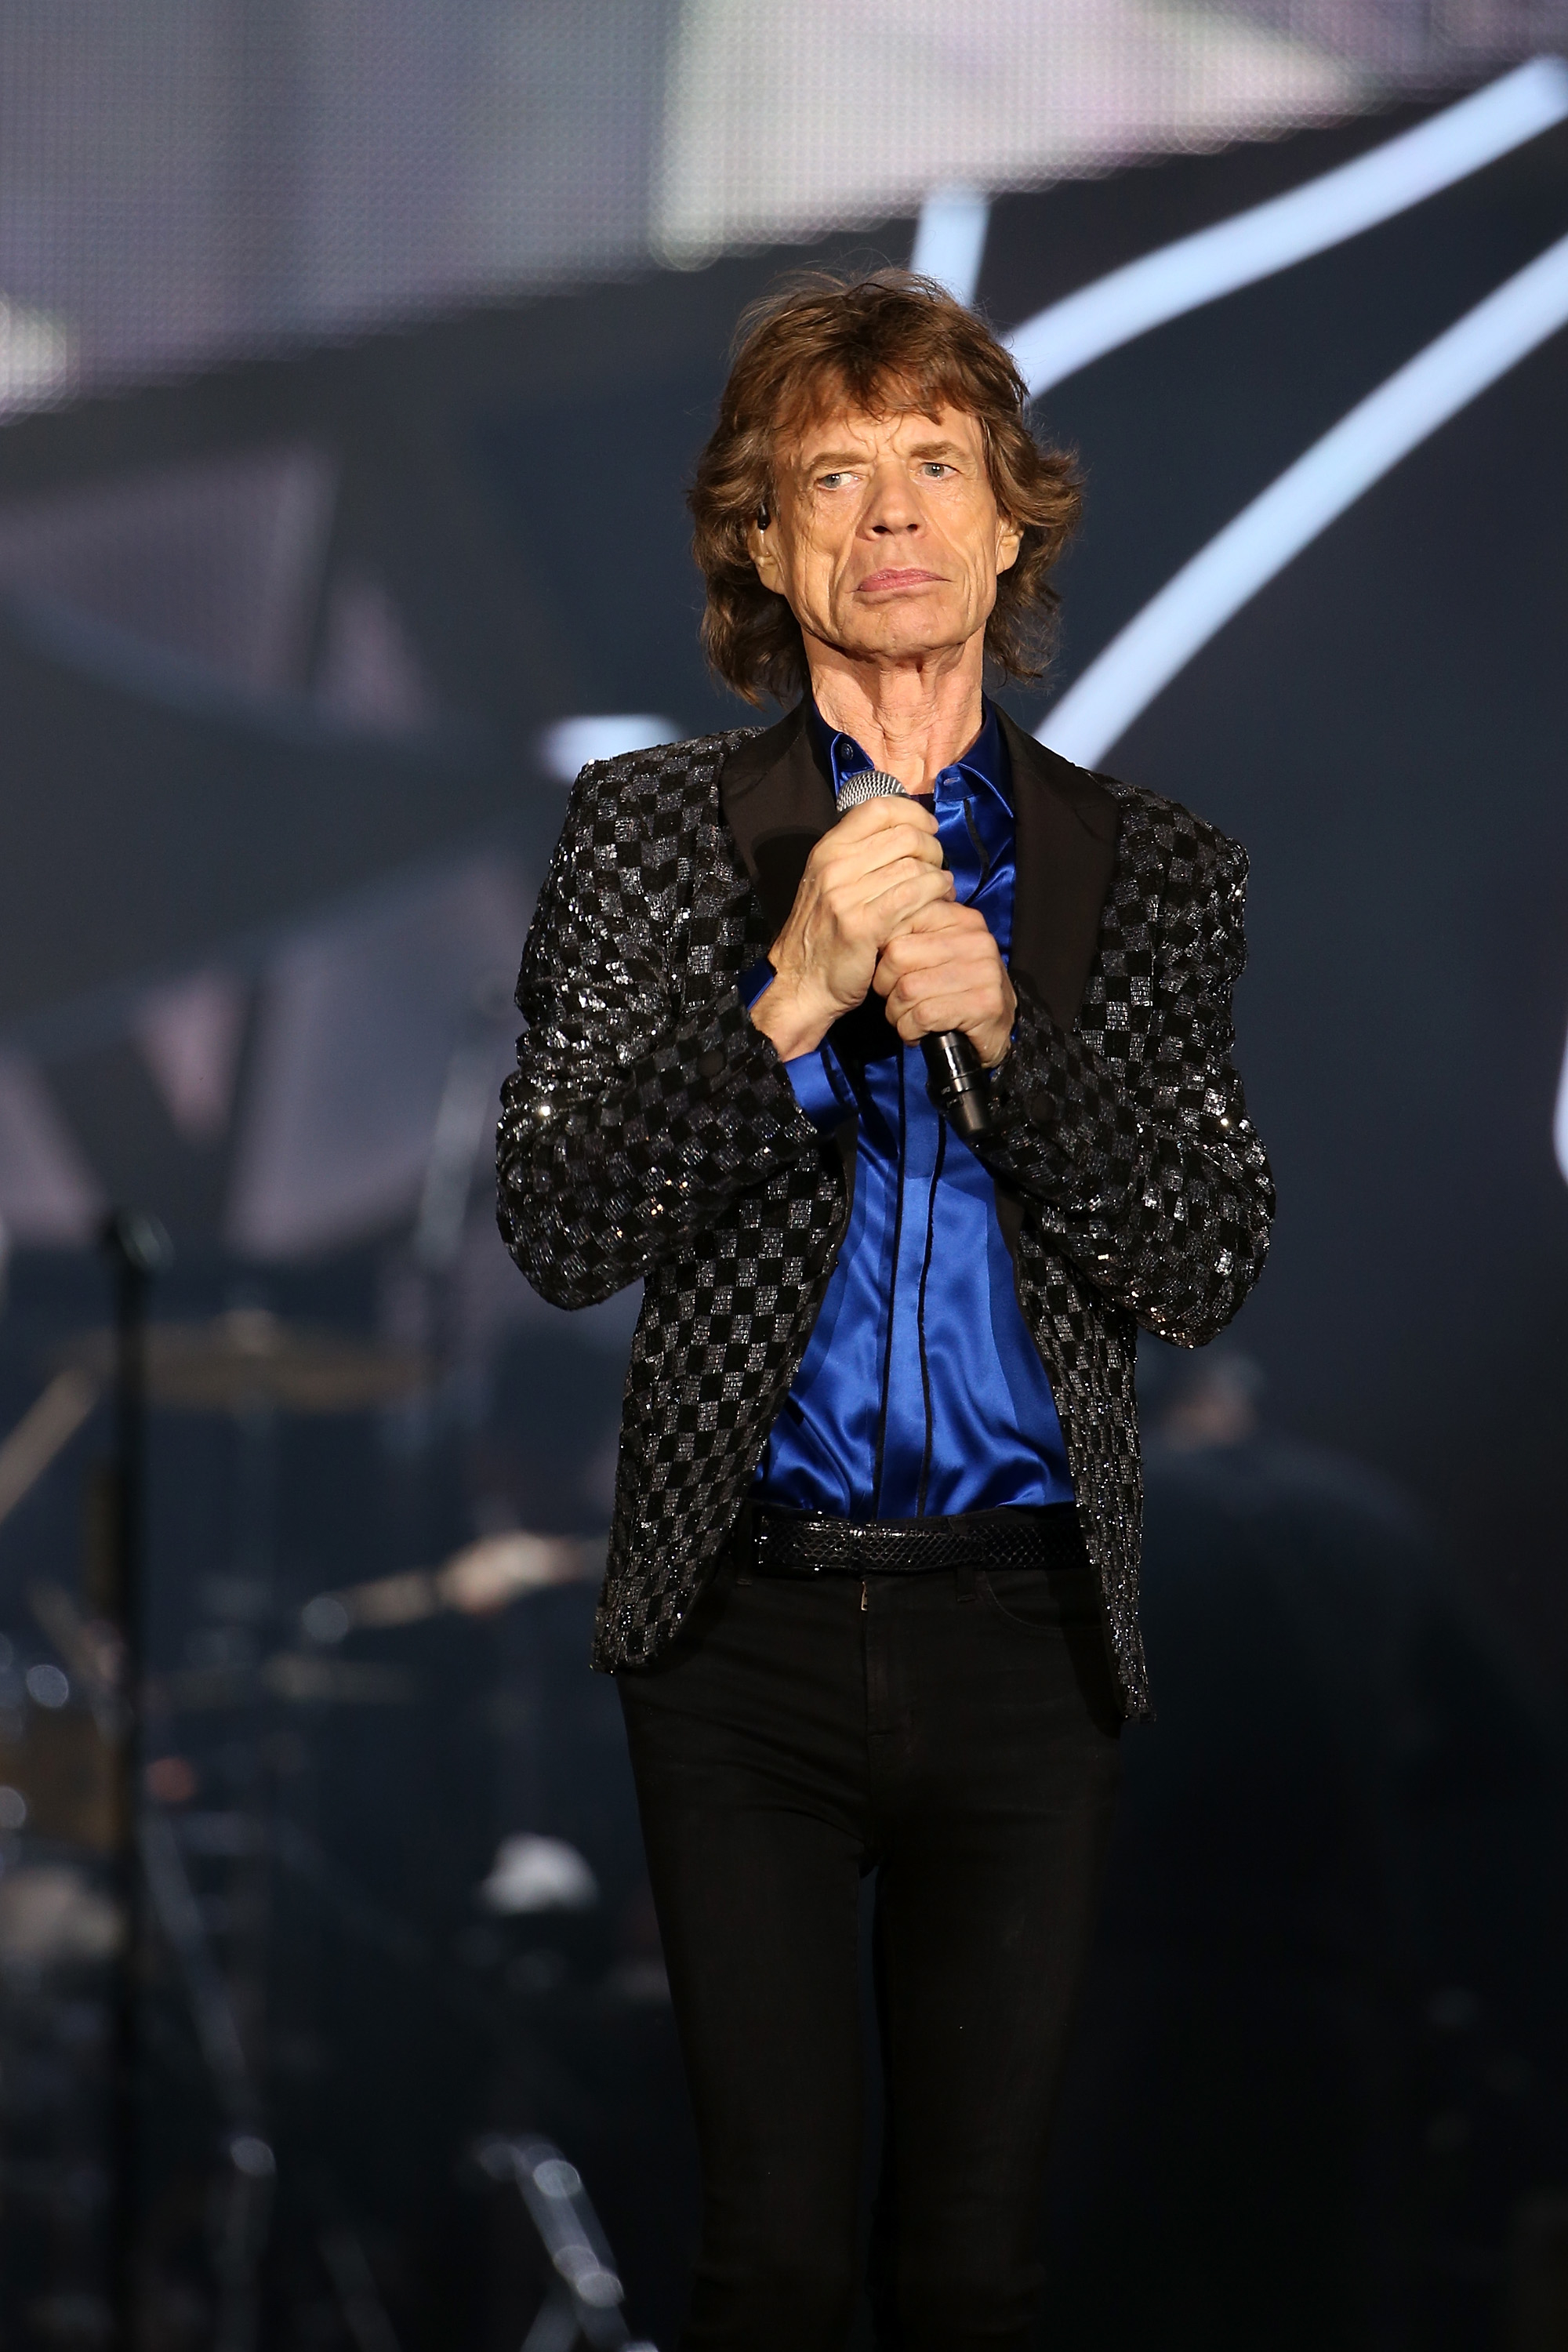 Mick Jagger onstage in a sparkling black jacket, blue shirt, holding a microphone